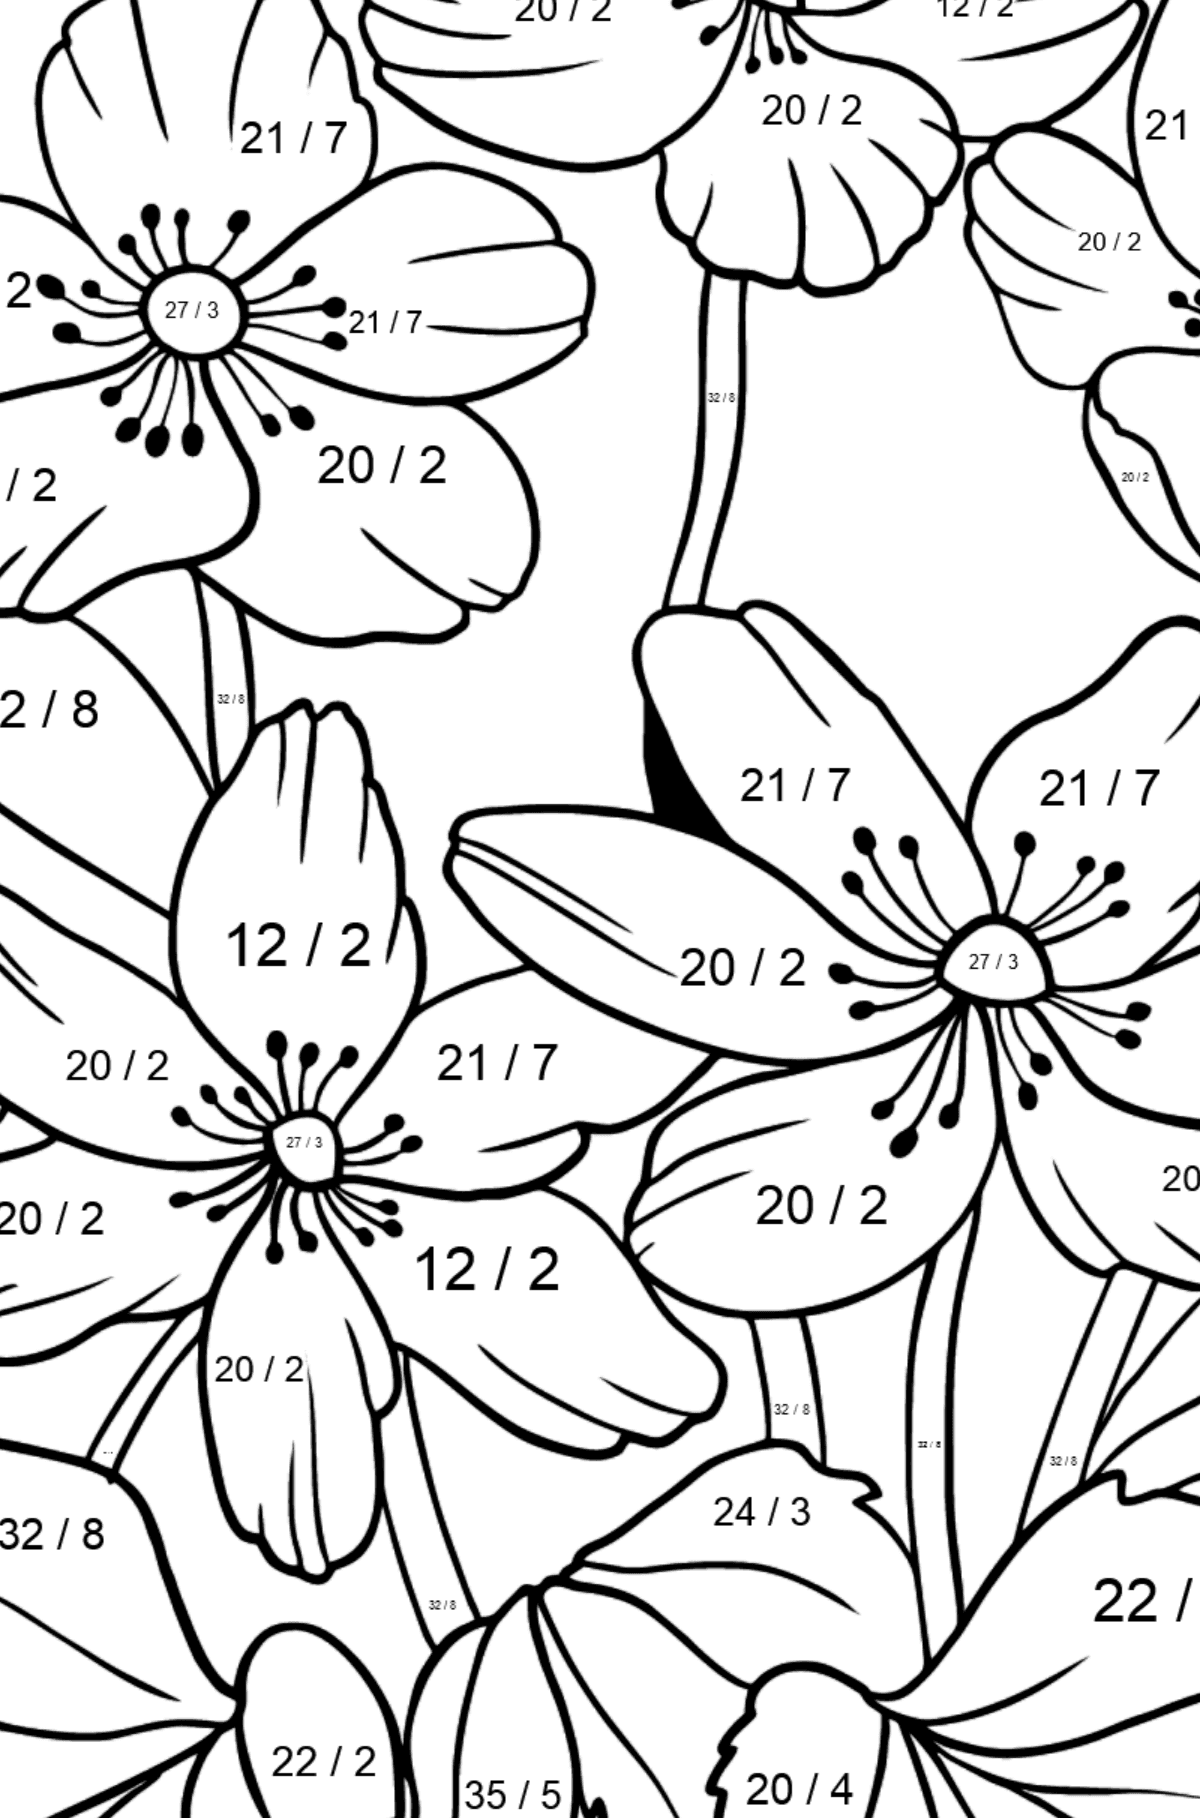 Flower Coloring Page - A Windflower with Yellow Petals - Math Coloring - Division for Kids